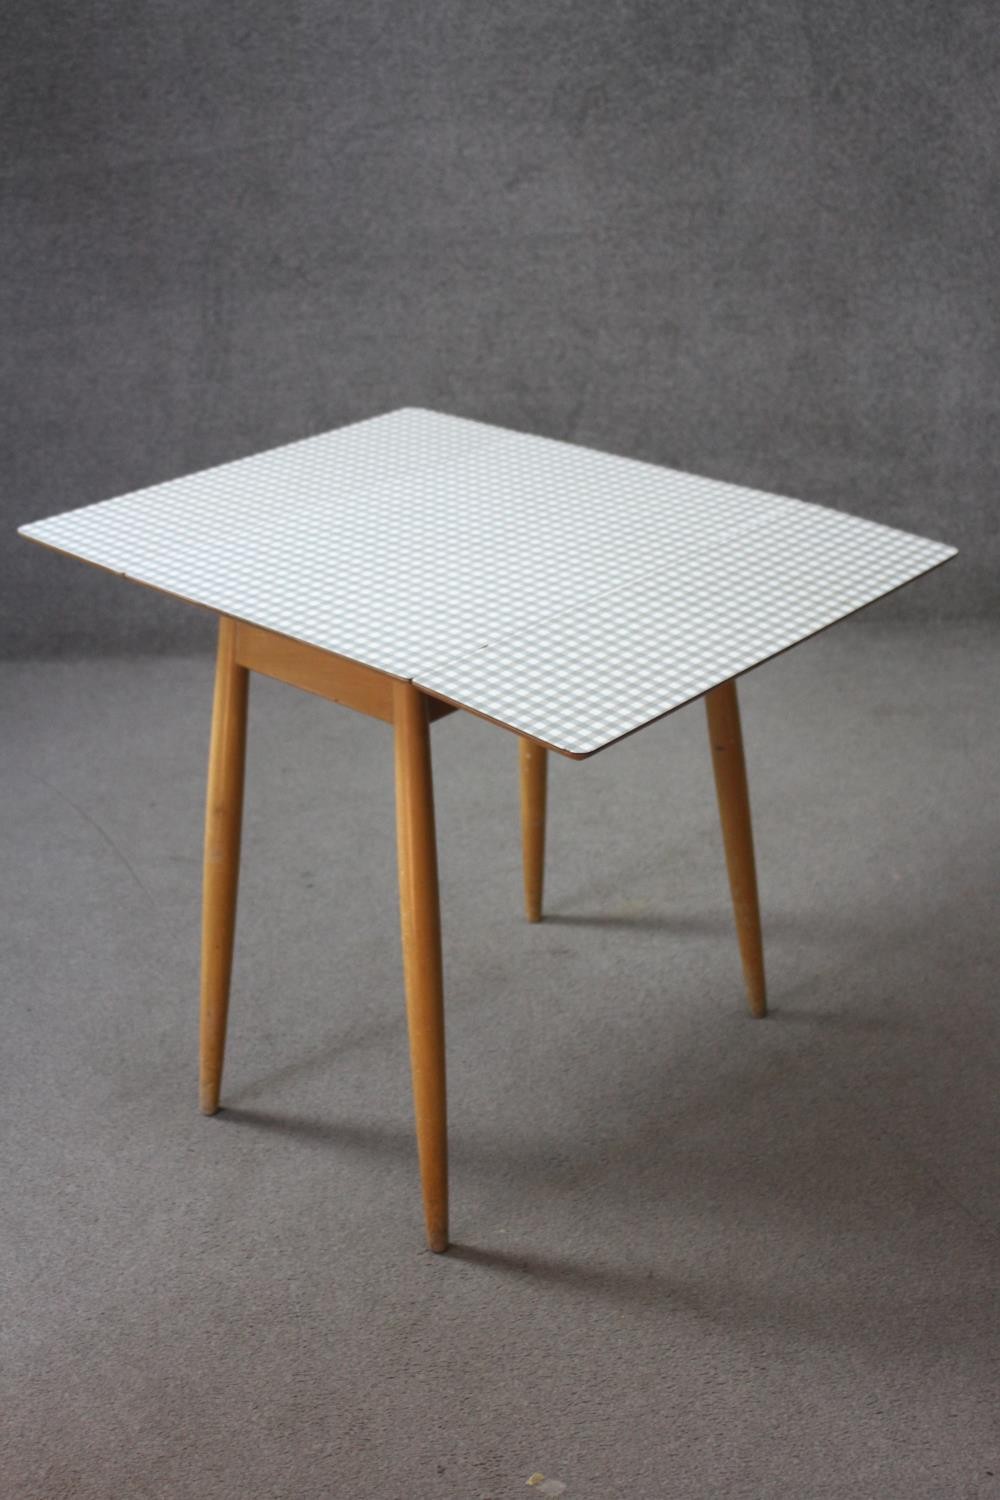 A mid century vintage drop flap kitchen table with gingham check laminated top. H.74 W.89 D.68 cm. - Image 7 of 11